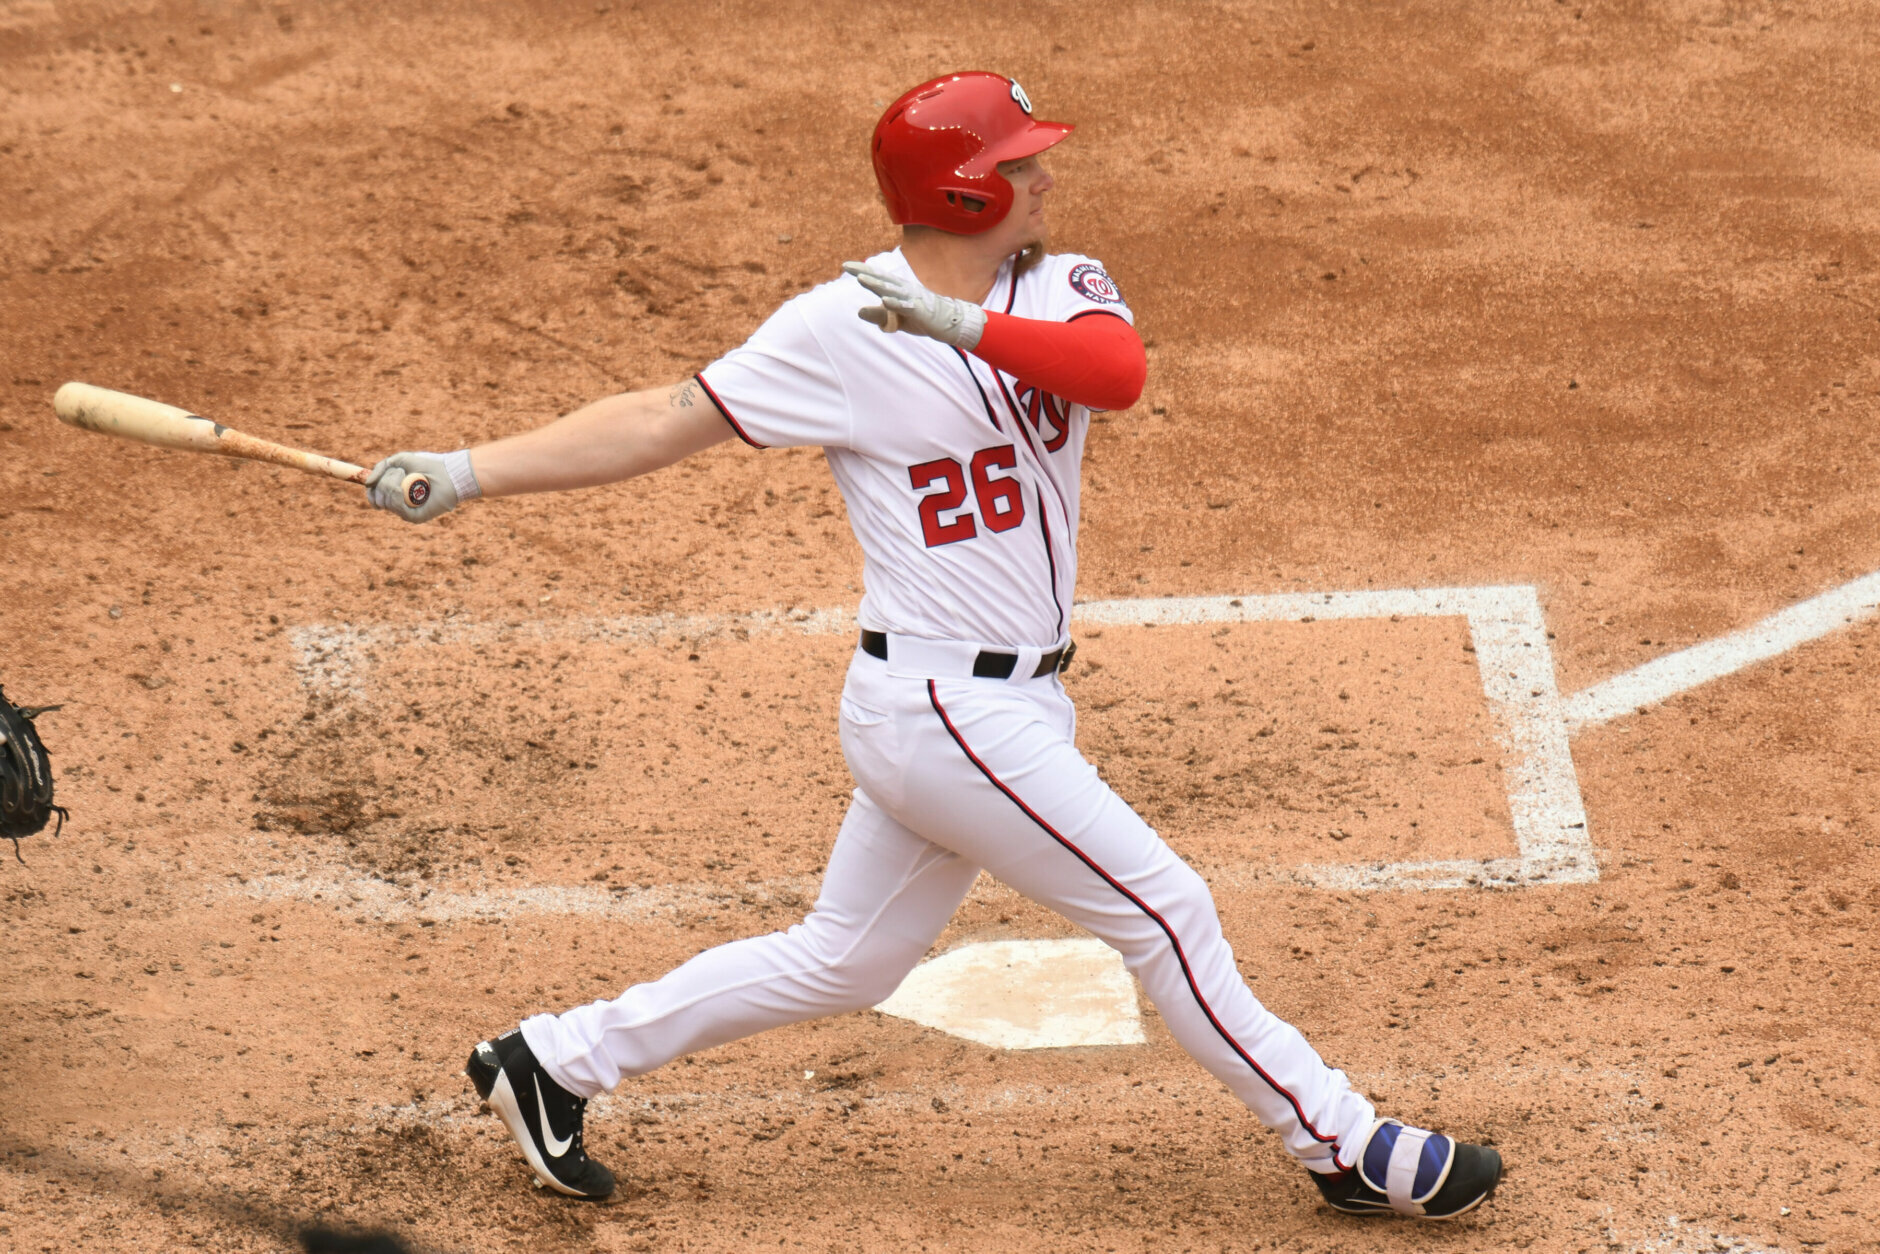 WASHINGTON, DC - APRIL 03:  Adam Lind #26 of the Washington Nationals hits a pitch hit home run pitches during the game against  the Miami Marlins at Nationals Park on April 3, 2017 in Washington, D.C.  The Nationals won 4-2.  (Photo by Mitchell Layton/Getty Images)